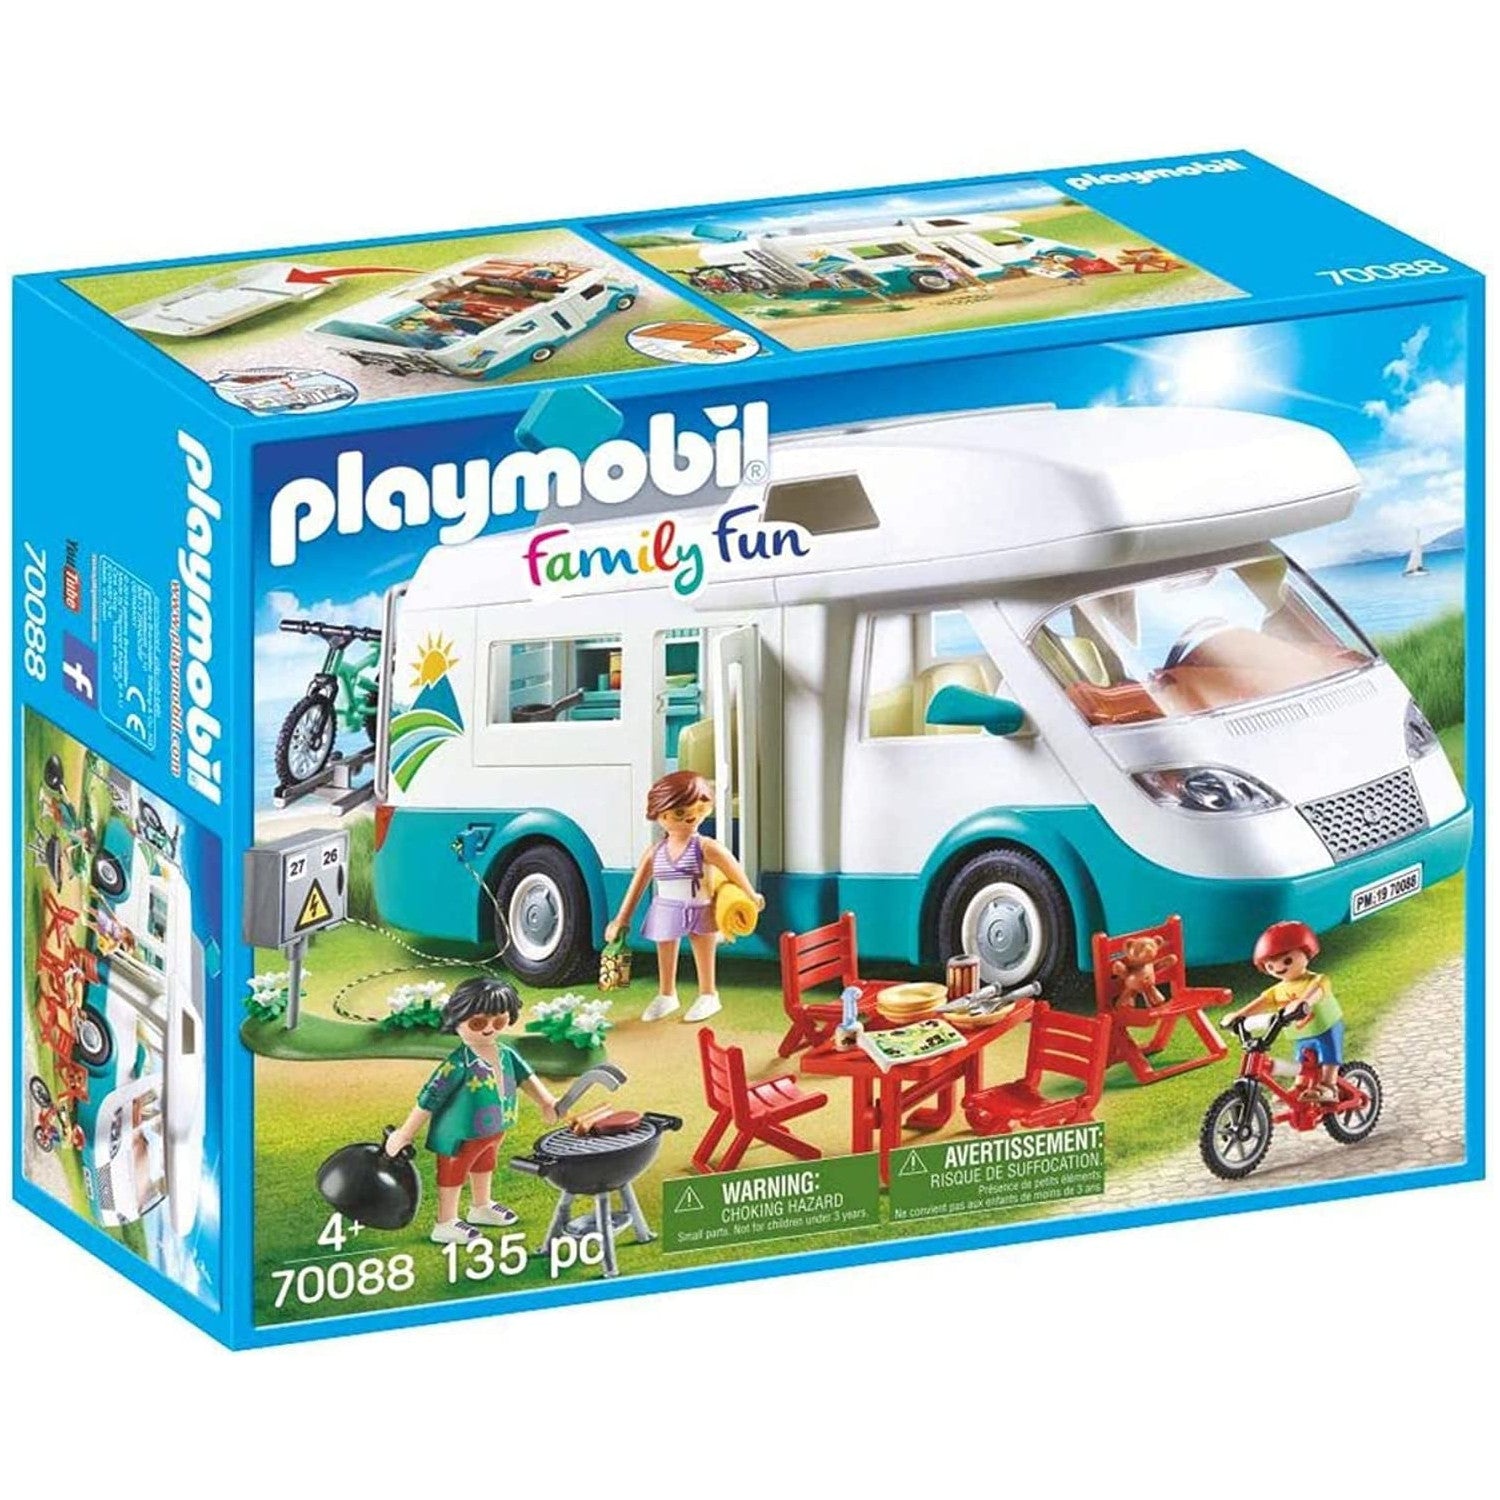 Le camping car sylvanian vehicules, figurines